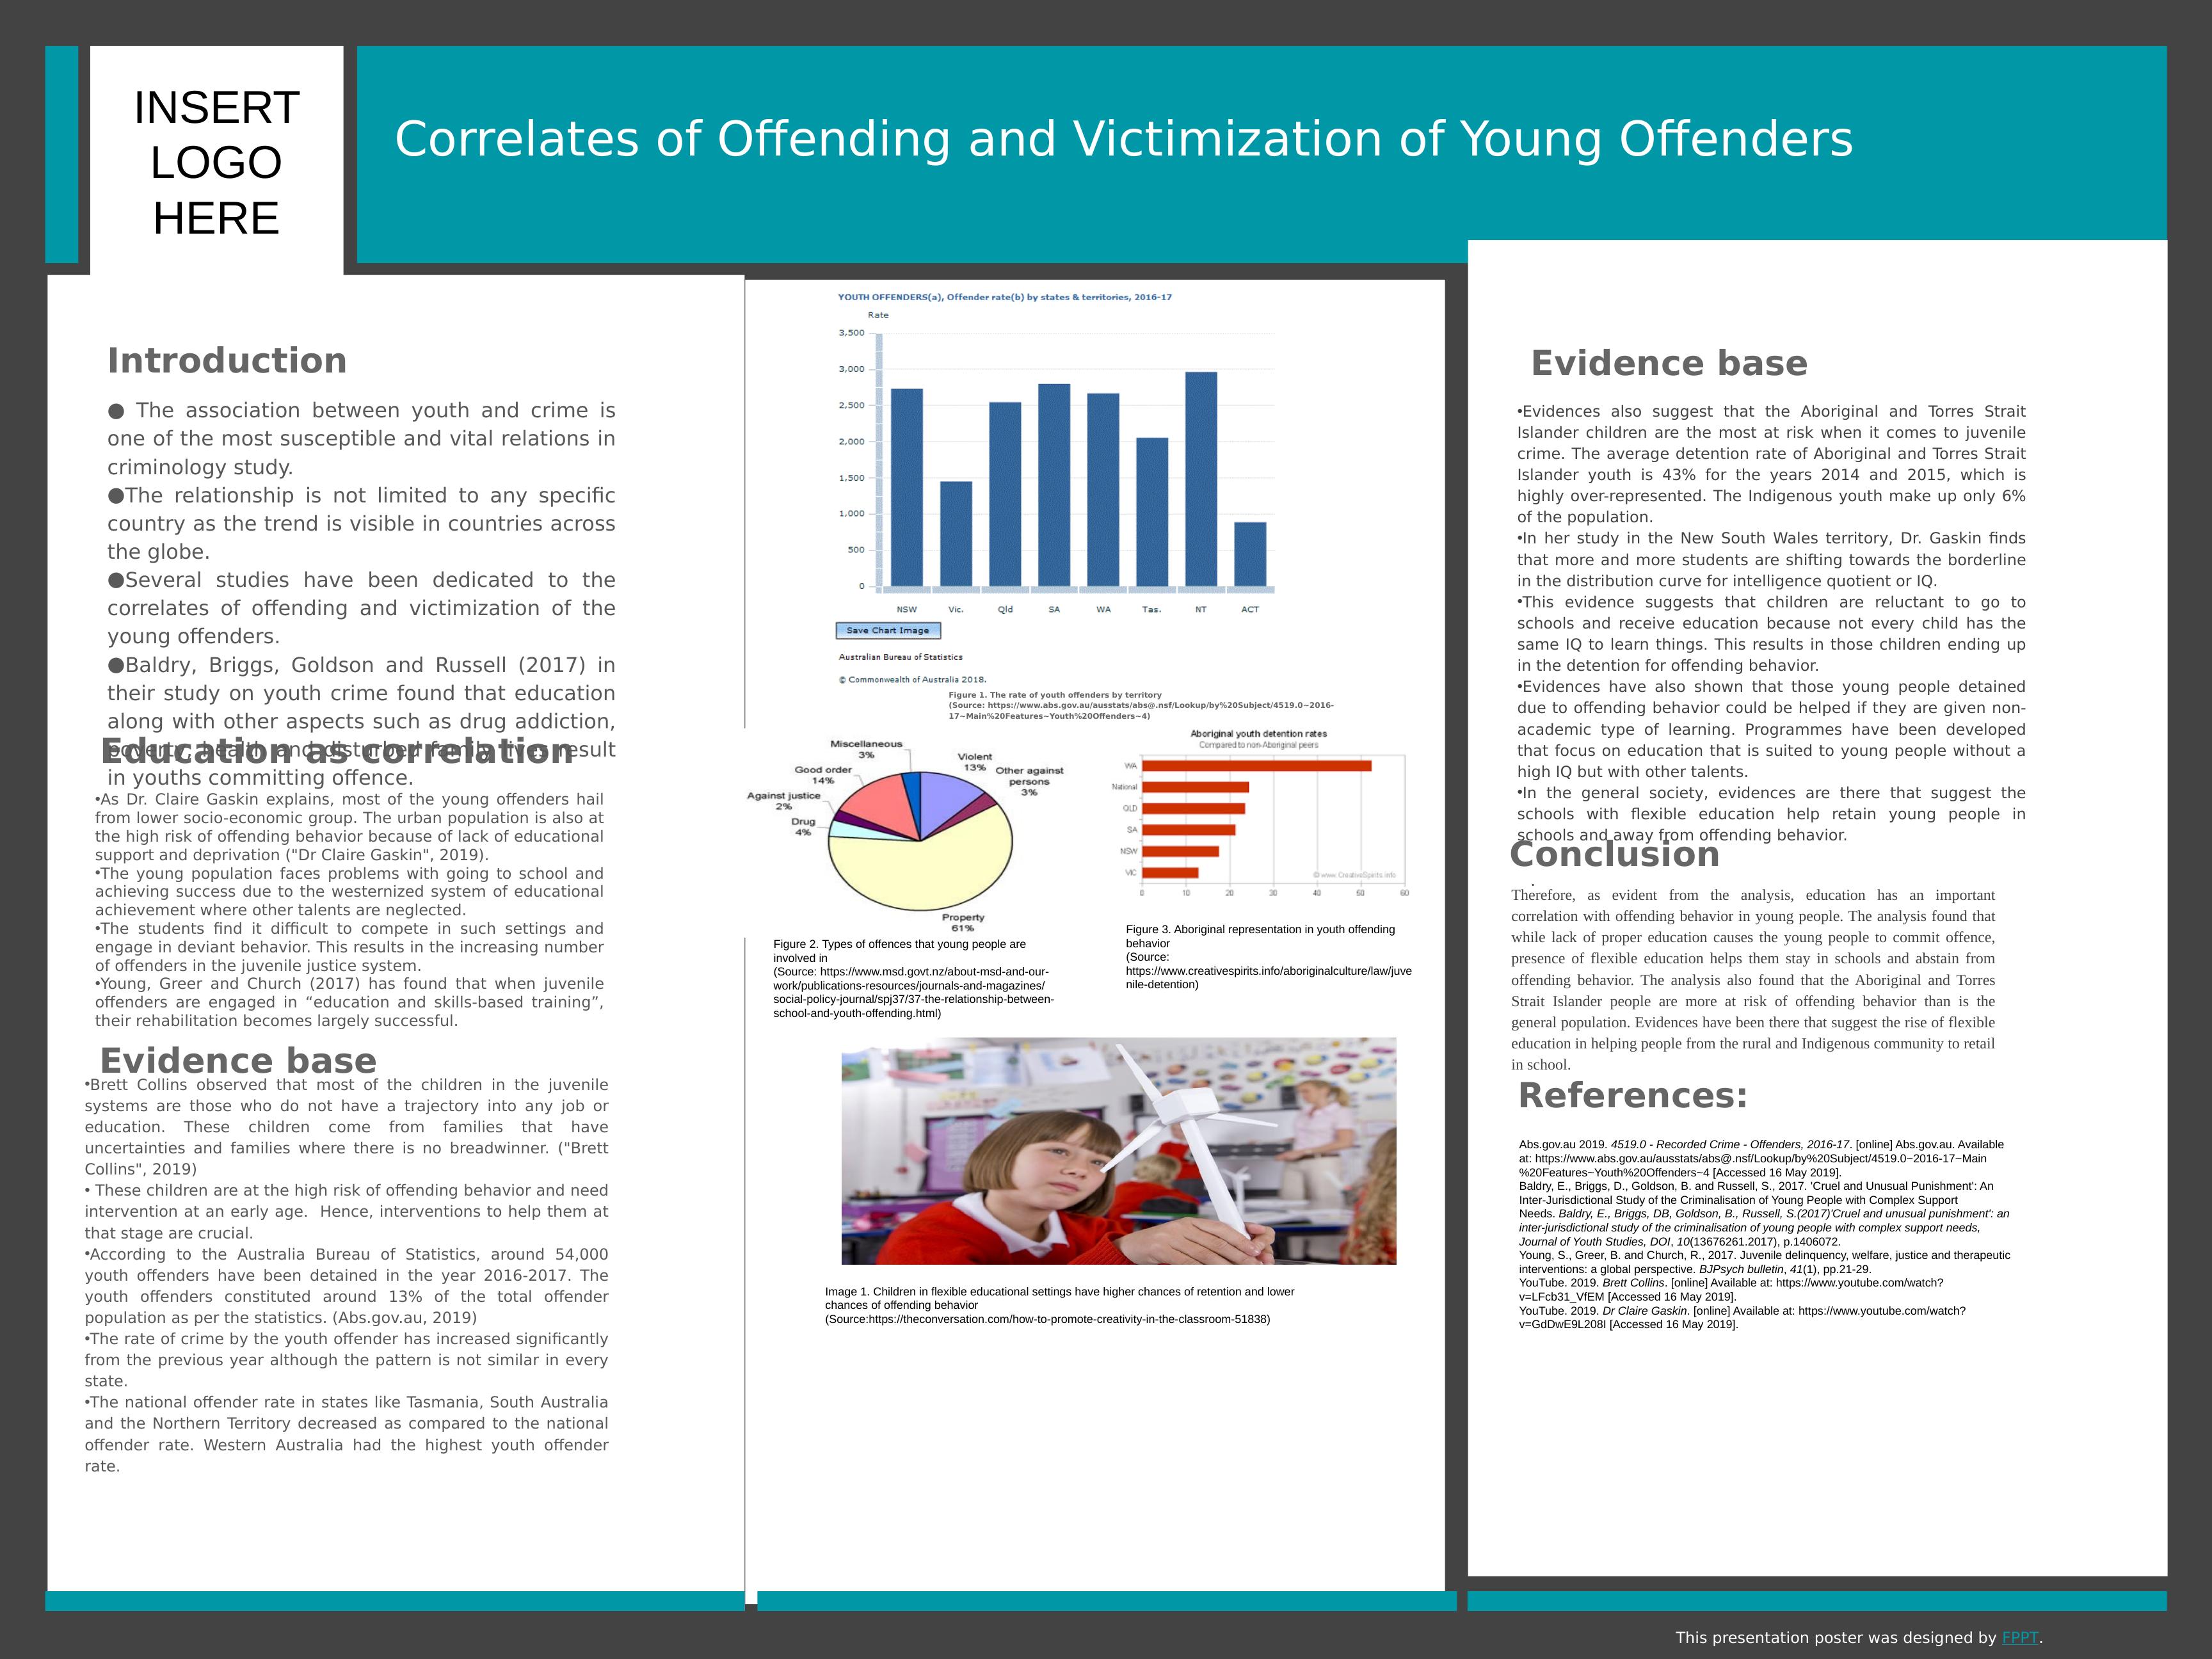 Correlates of Offending and Victimization of Young Offenders_1